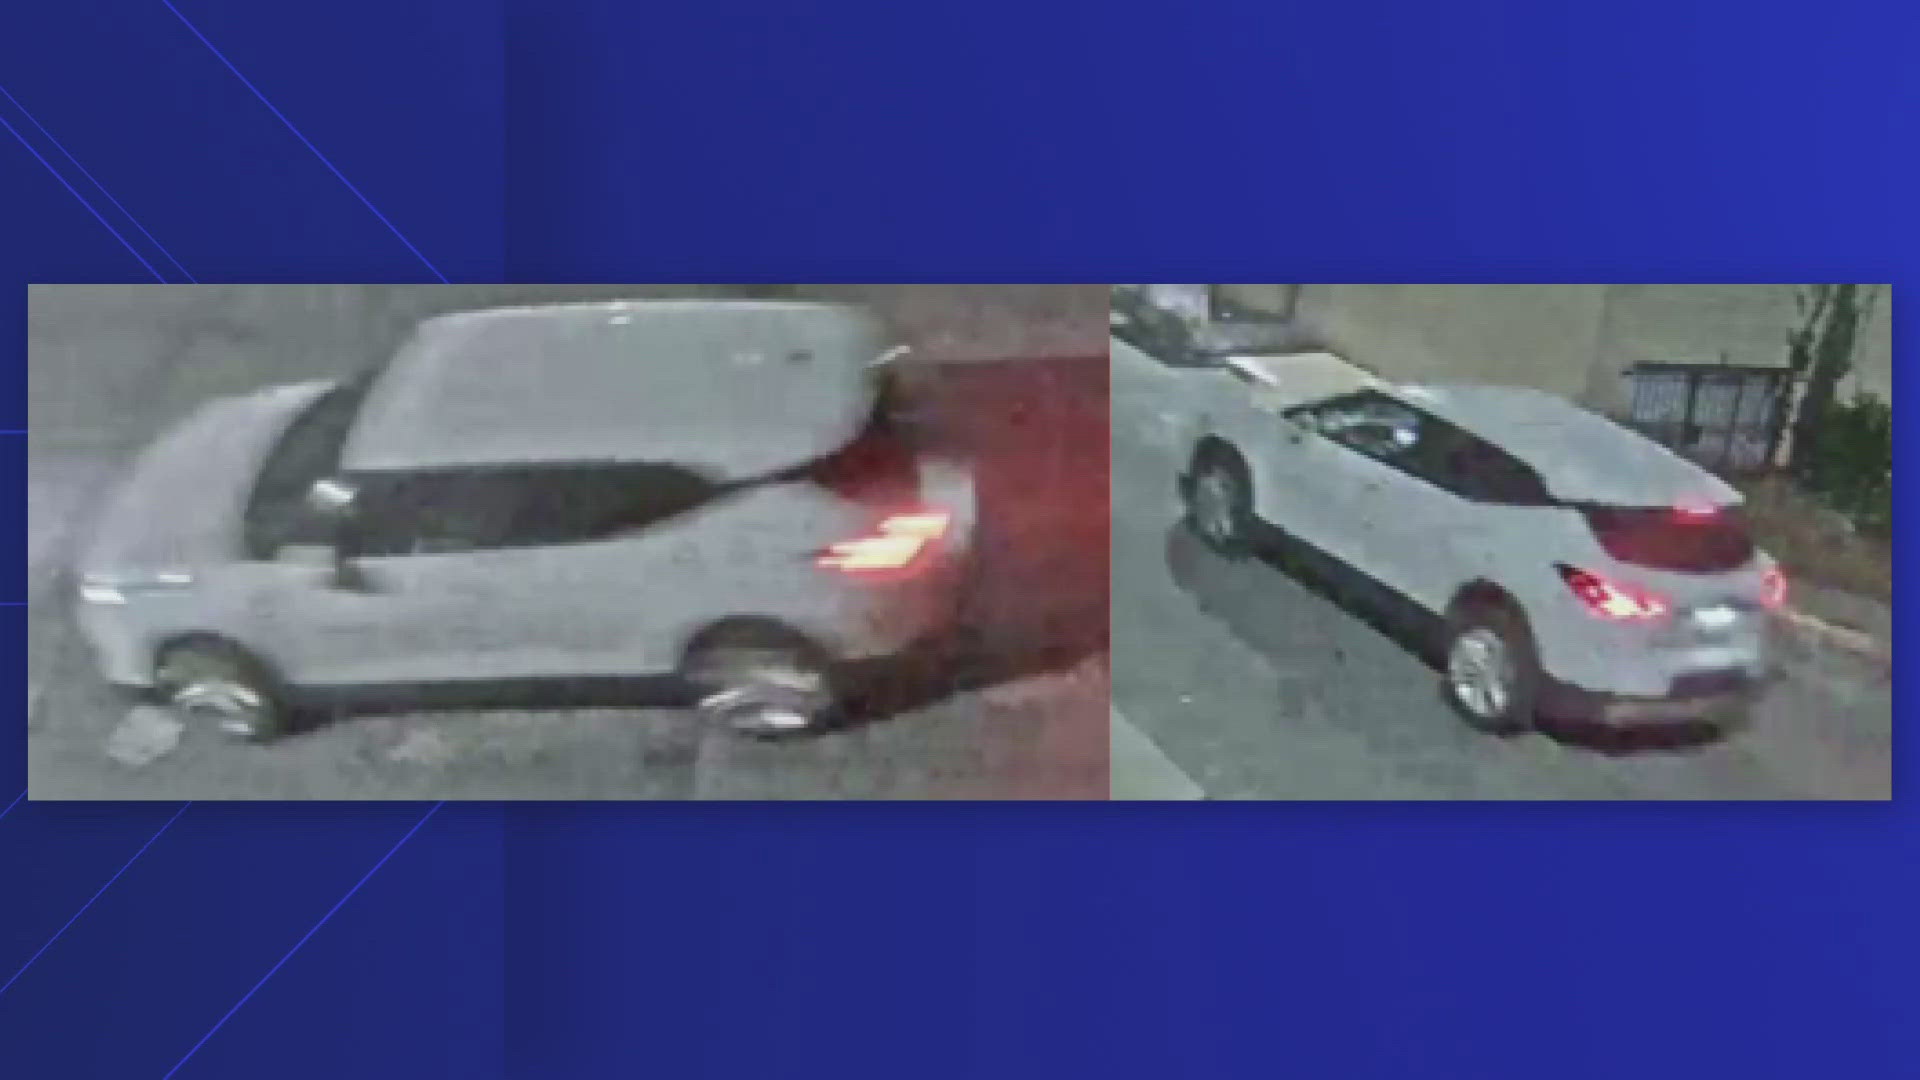 On Monday evening, police released photos from a surveillance camera of a car investigators say is connected to the shooting.